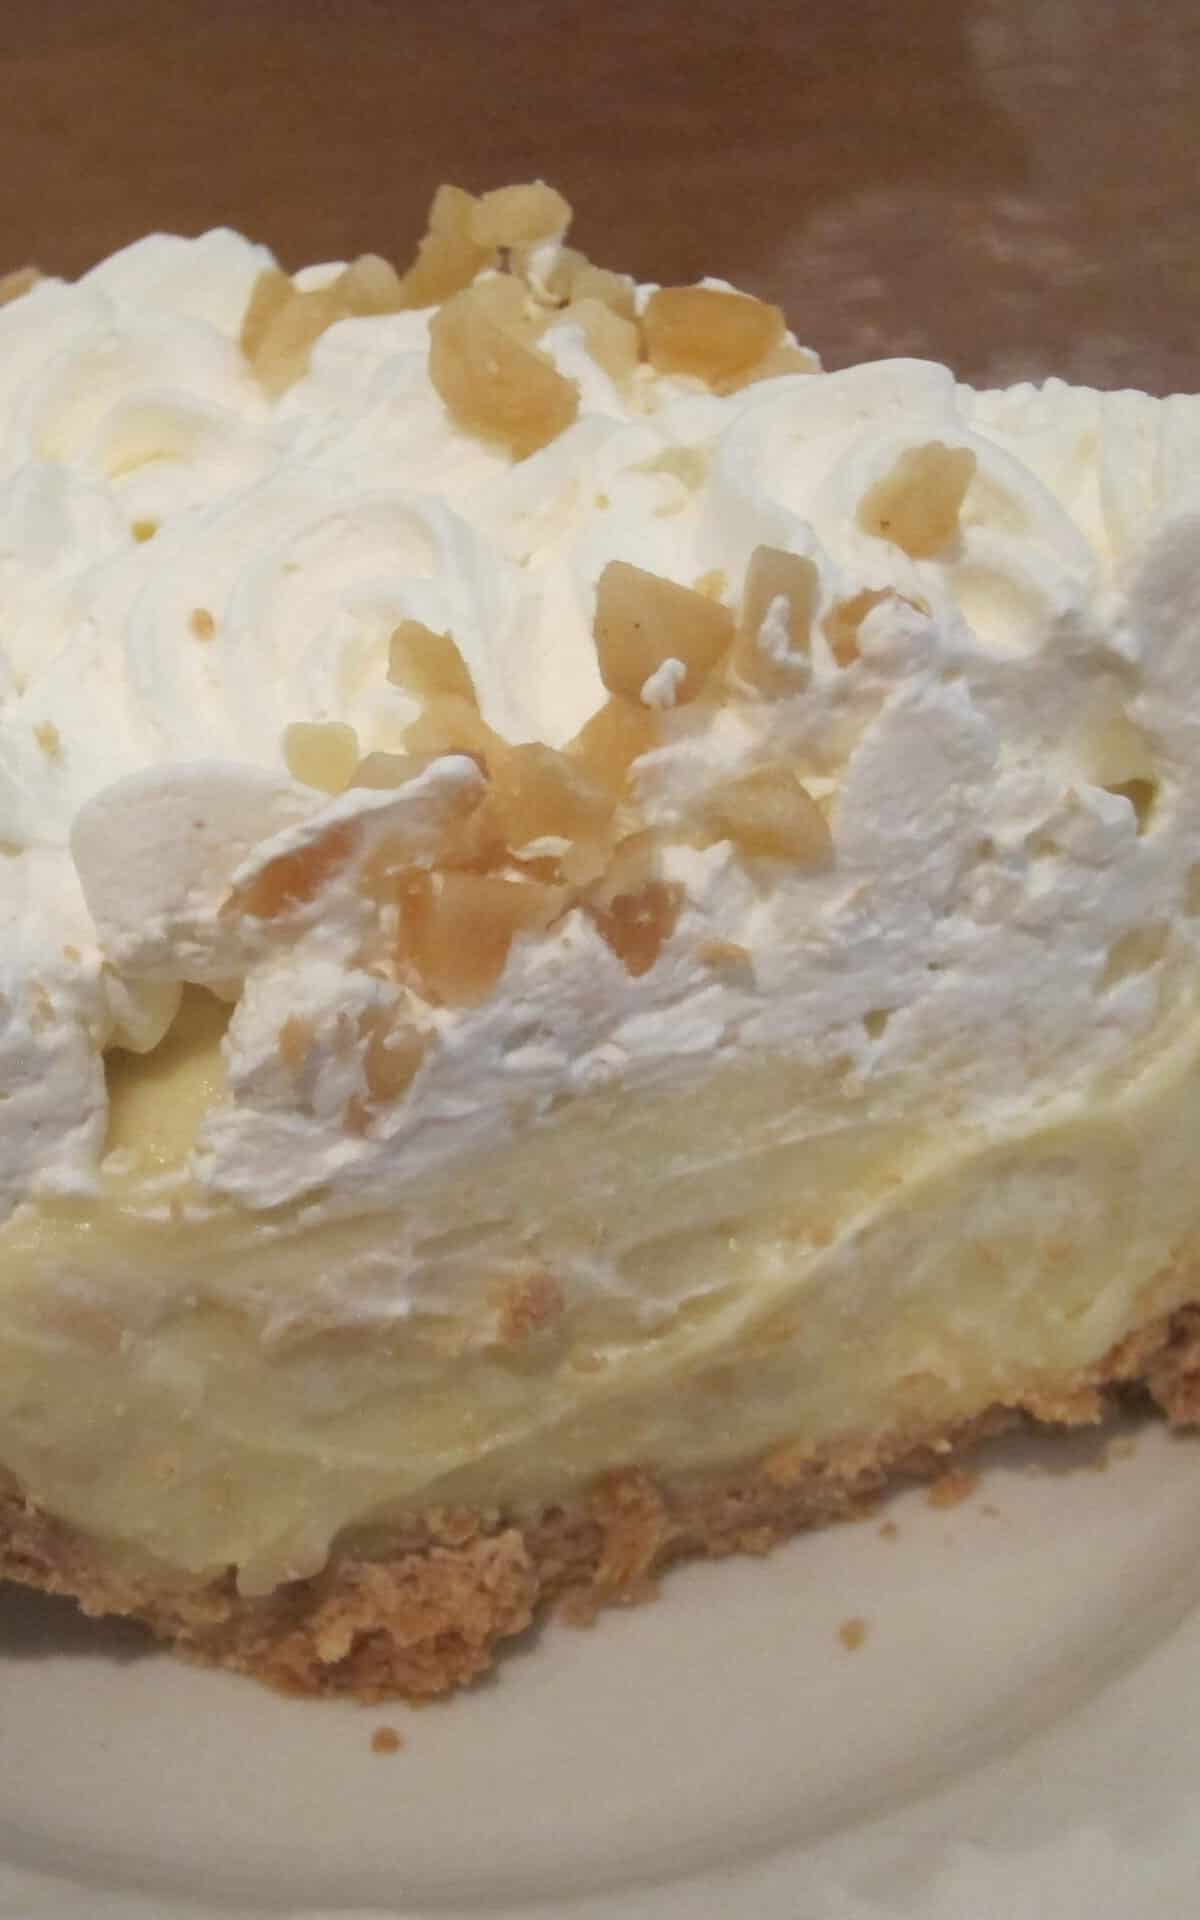  Get ready to go nuts over this delectable pie